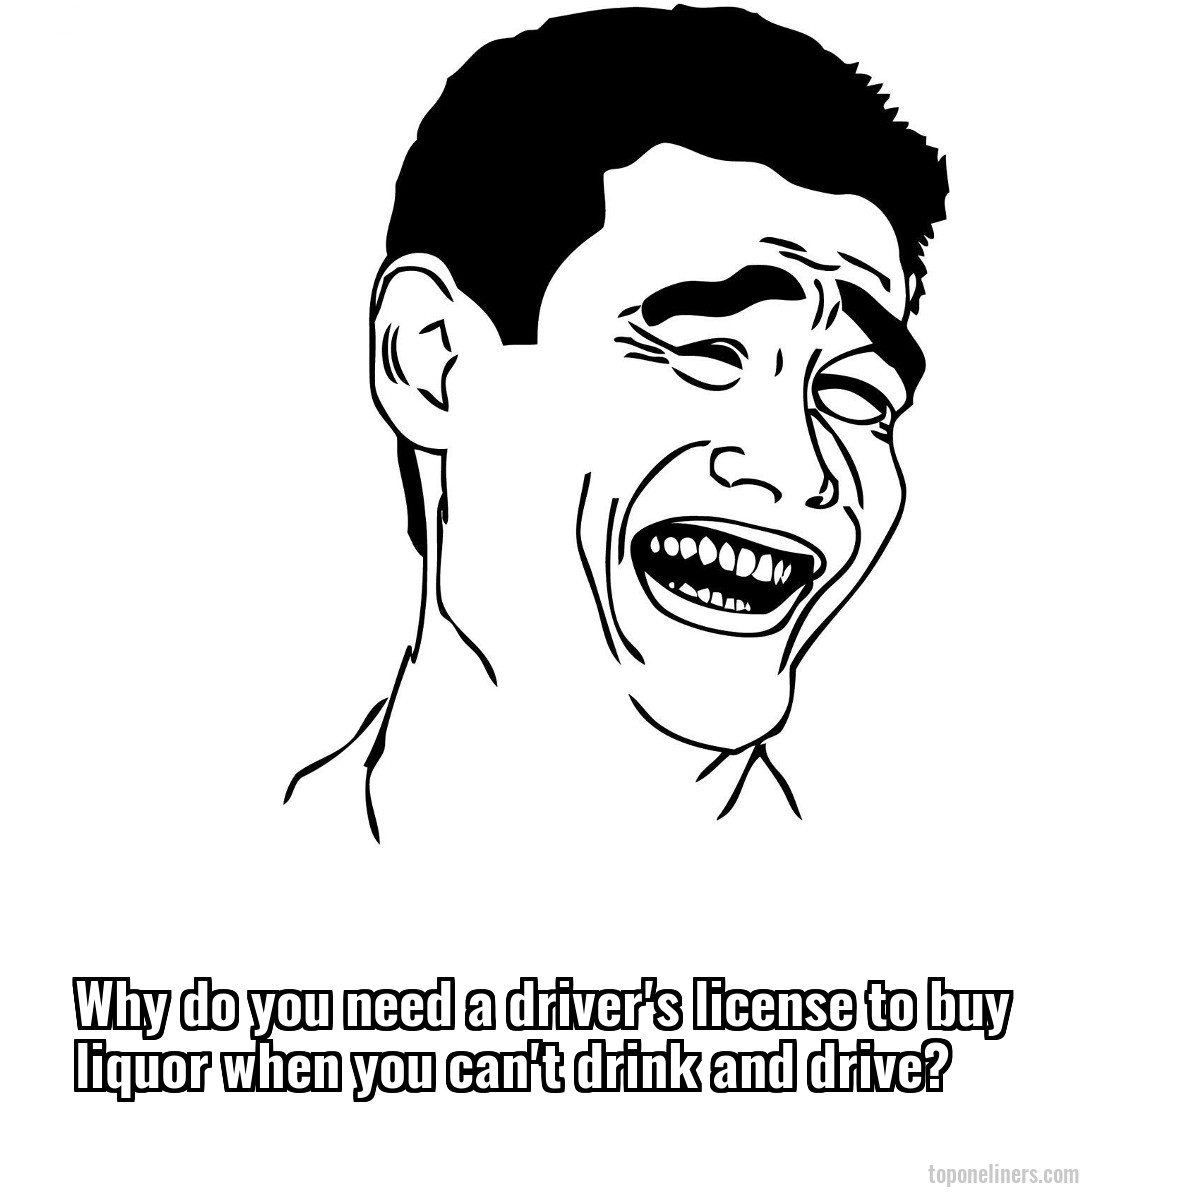 Why do you need a driver's license to buy liquor when you can't drink and drive?